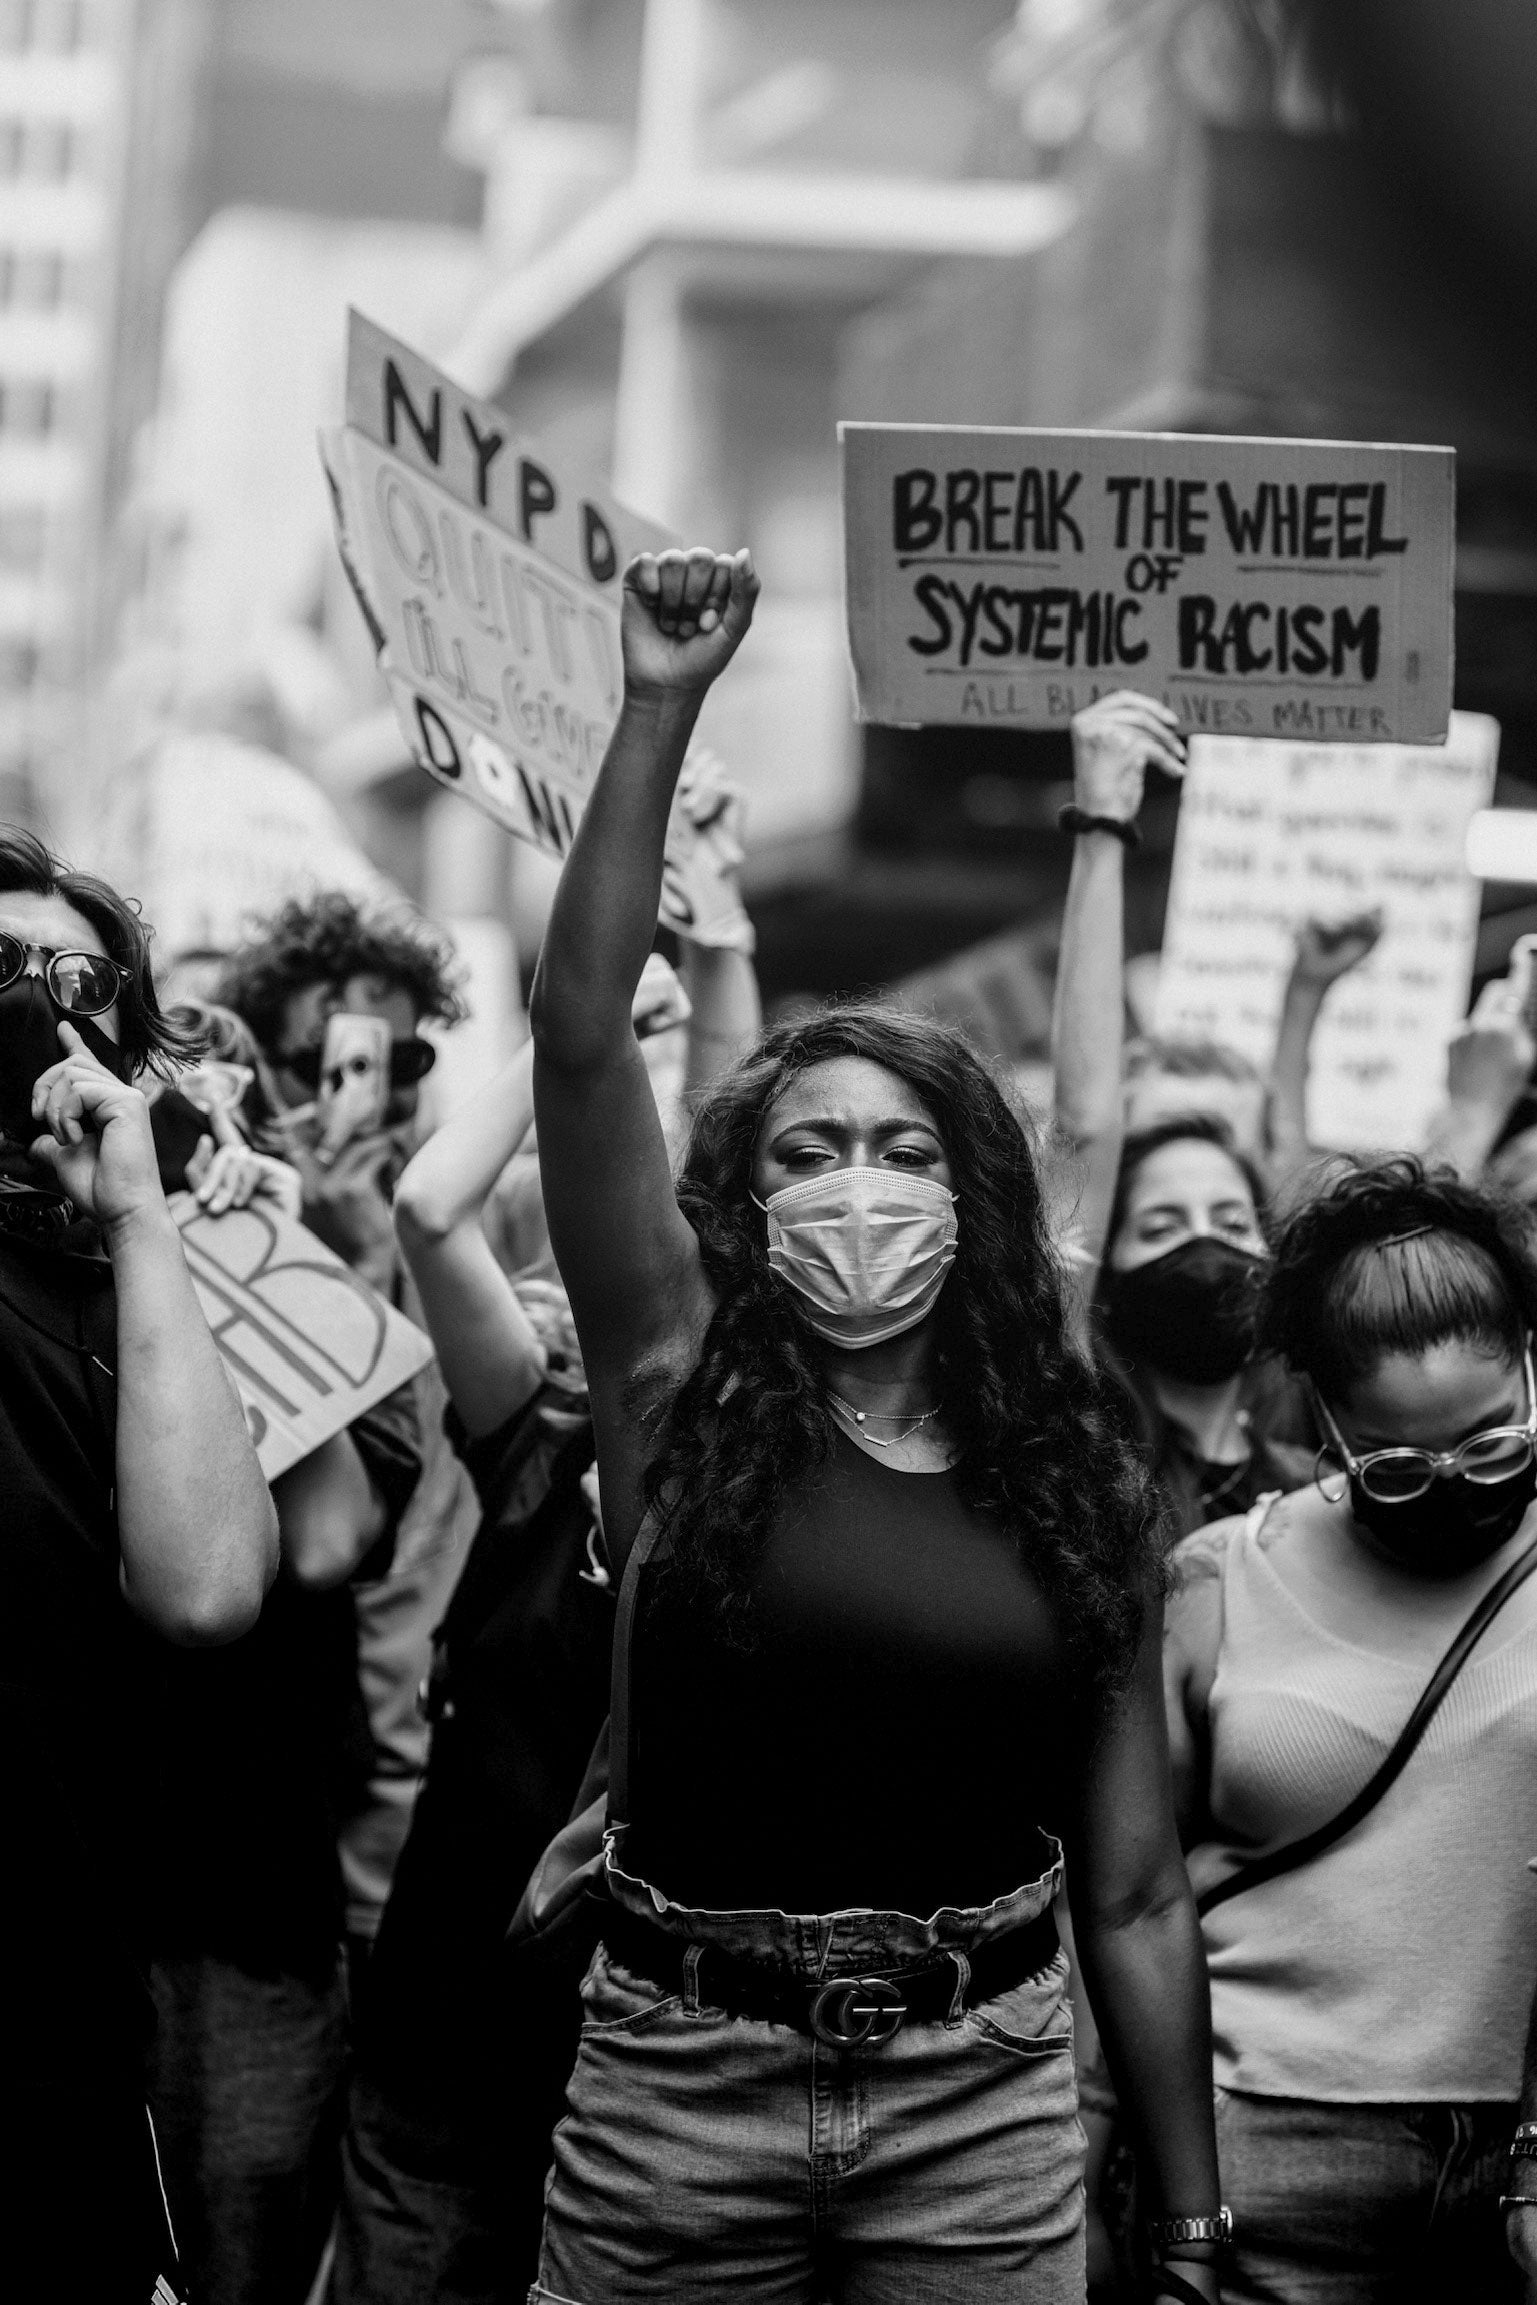 Protesters in NYC after the murder of George Floyd in May 2020